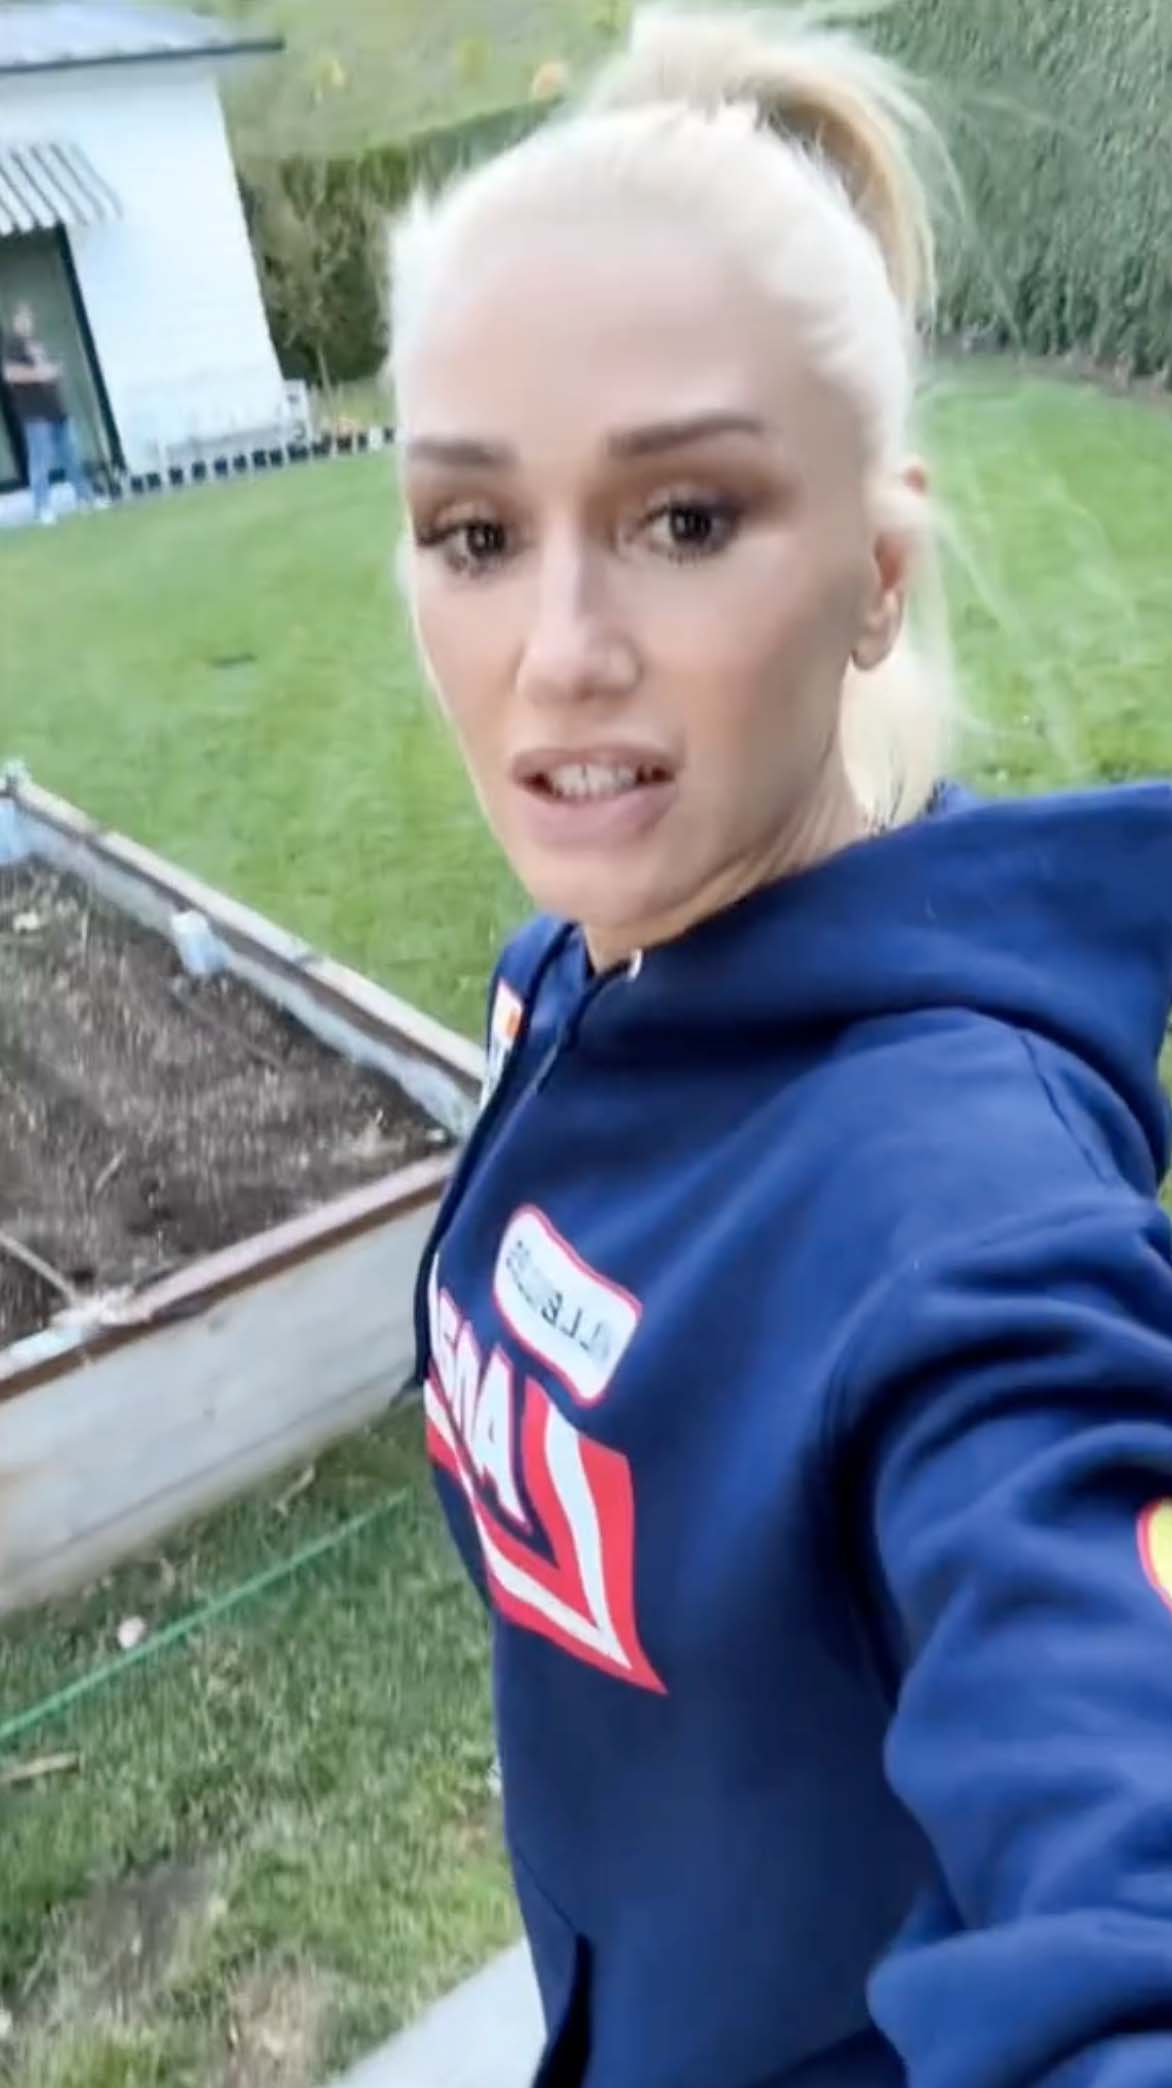 Gwen posted the gardening video to her TikTok account on Saturday